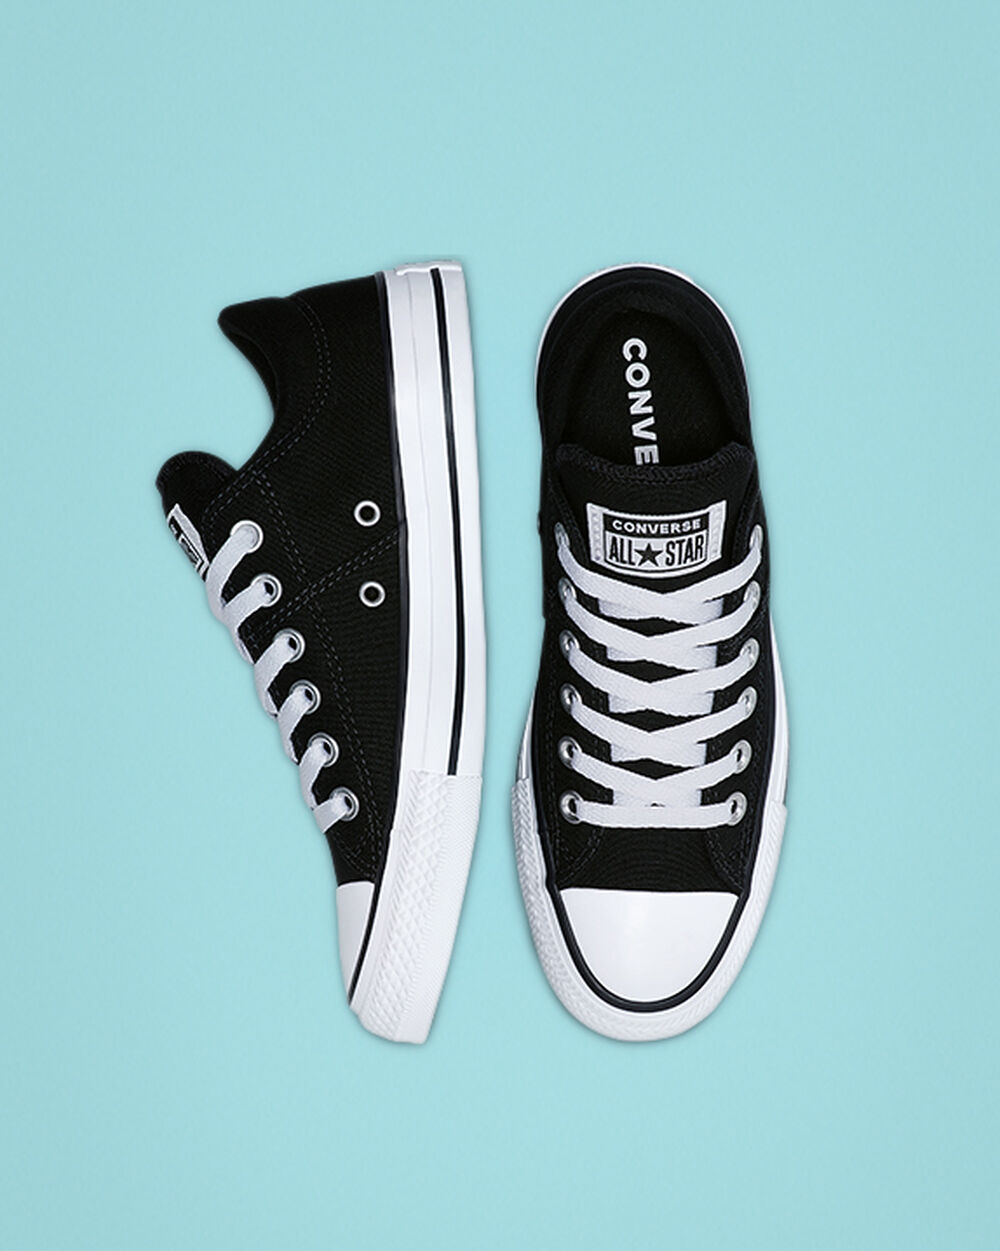 Tenis Converse Chuck Taylor All Star Madison Mujer Negros Blancos Negros | Mexico-381606